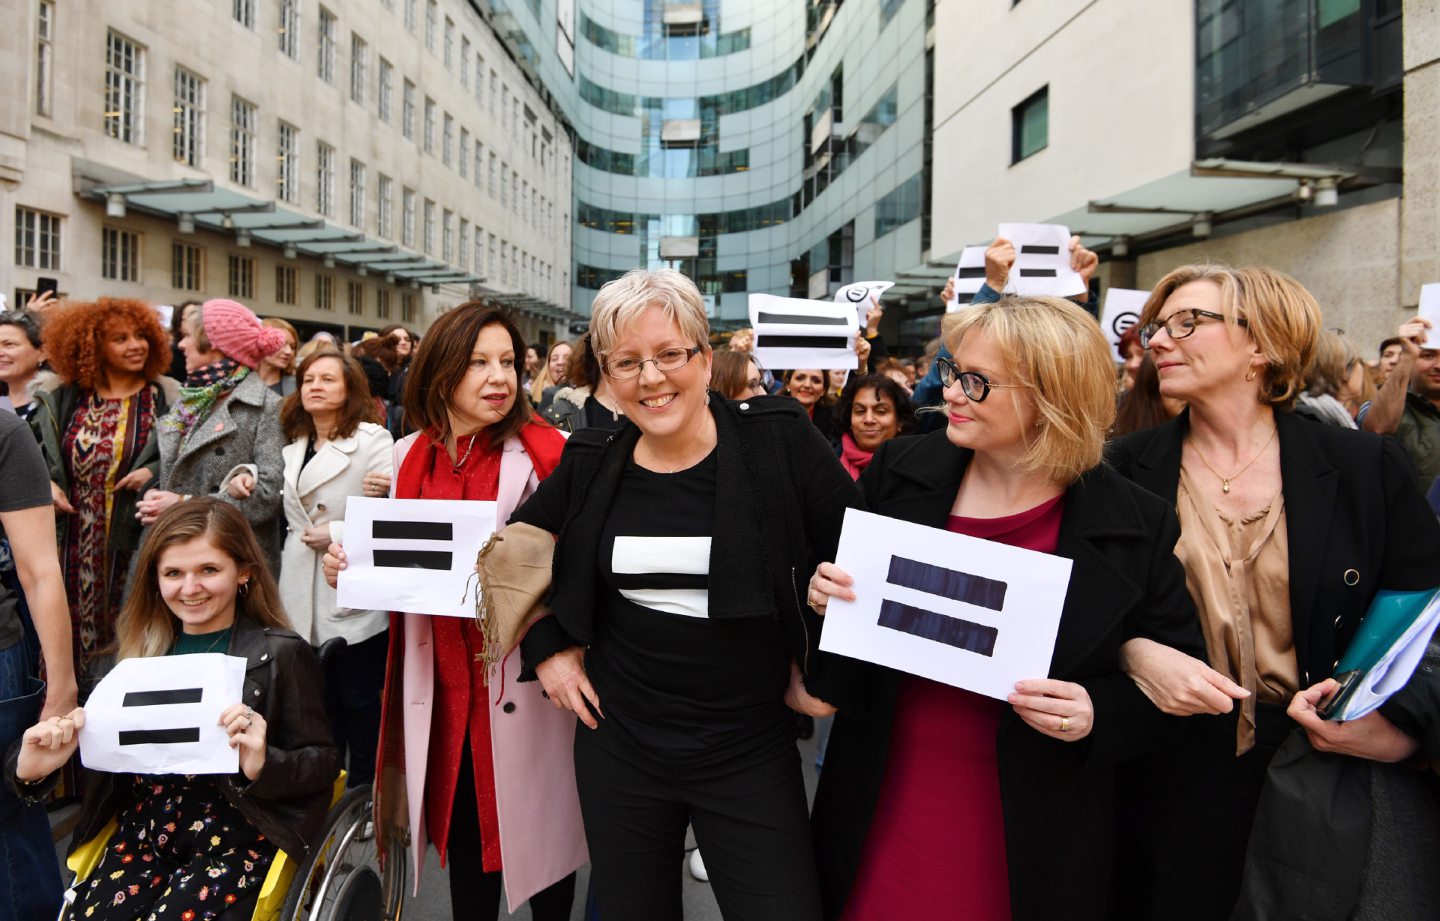 Journalist Carrie Gracie (centre) and BBC employees gather outside Broadcasting House in London, to highlight equal pay on International Women's Day. PRESS ASSOCIATION Photo. Picture date: Thursday March 8, 2018. See PA story MEDIA Women. Photo credit should read: John Stillwell/PA Wire